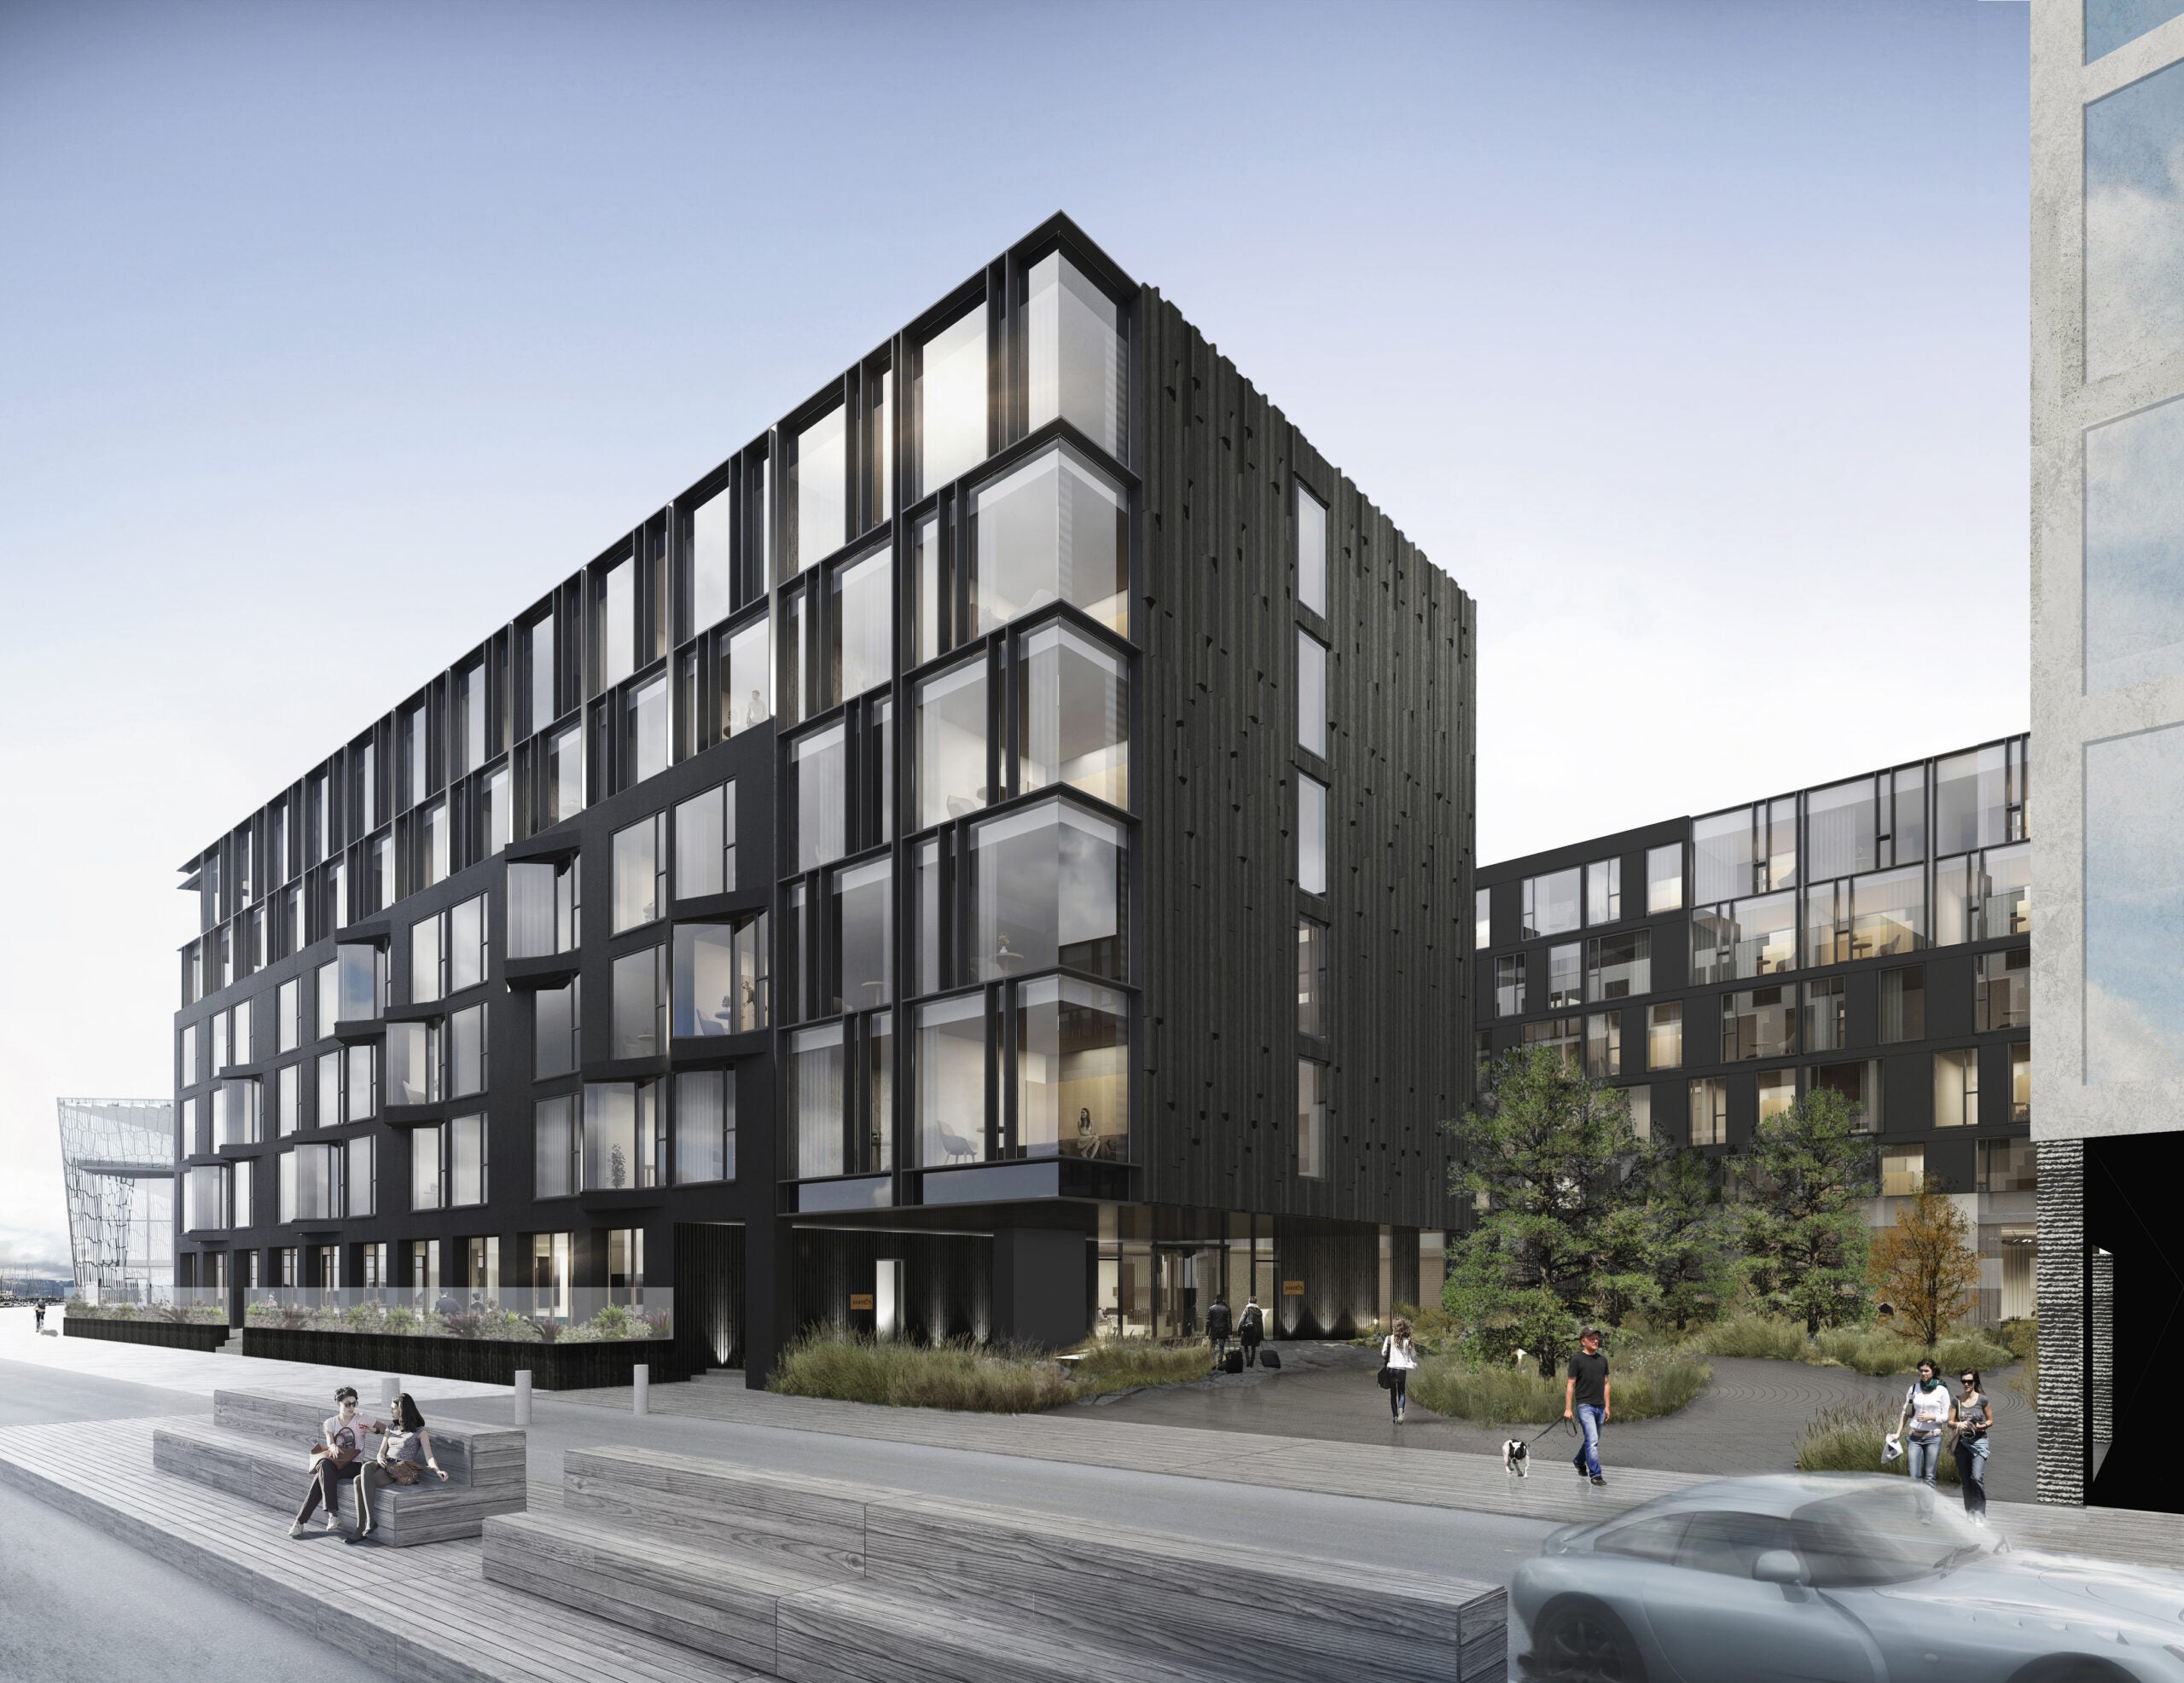 Presentation of the Reykjavík Edition Hotel, with large glass windows, wooden benches and seating for people